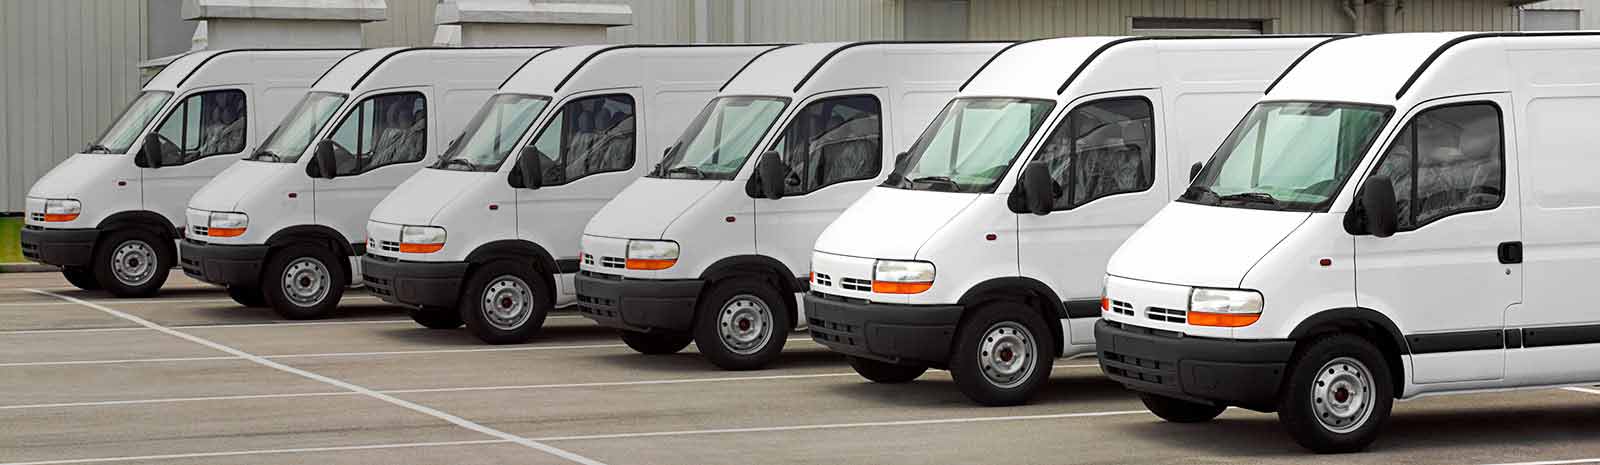 Business vehicles standing in a row in a parking lot.